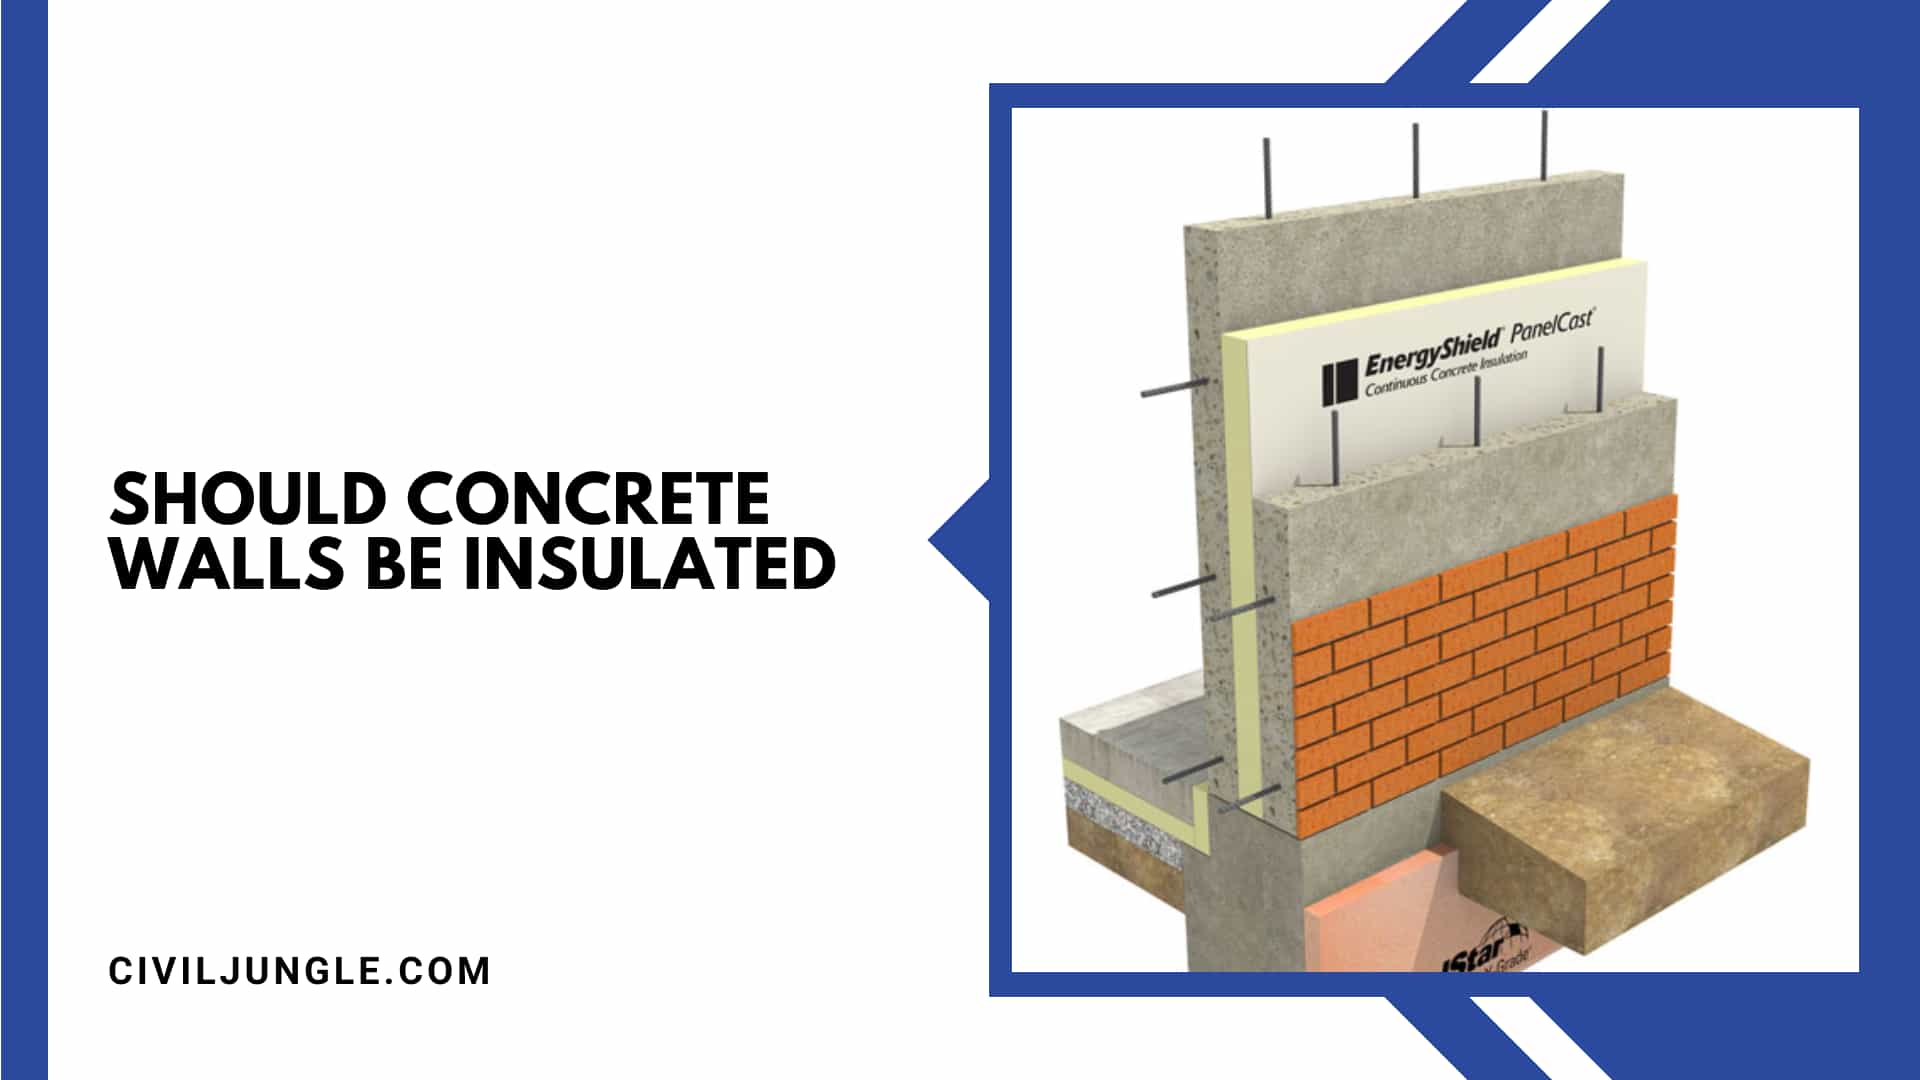 Should Concrete Walls Be Insulated?